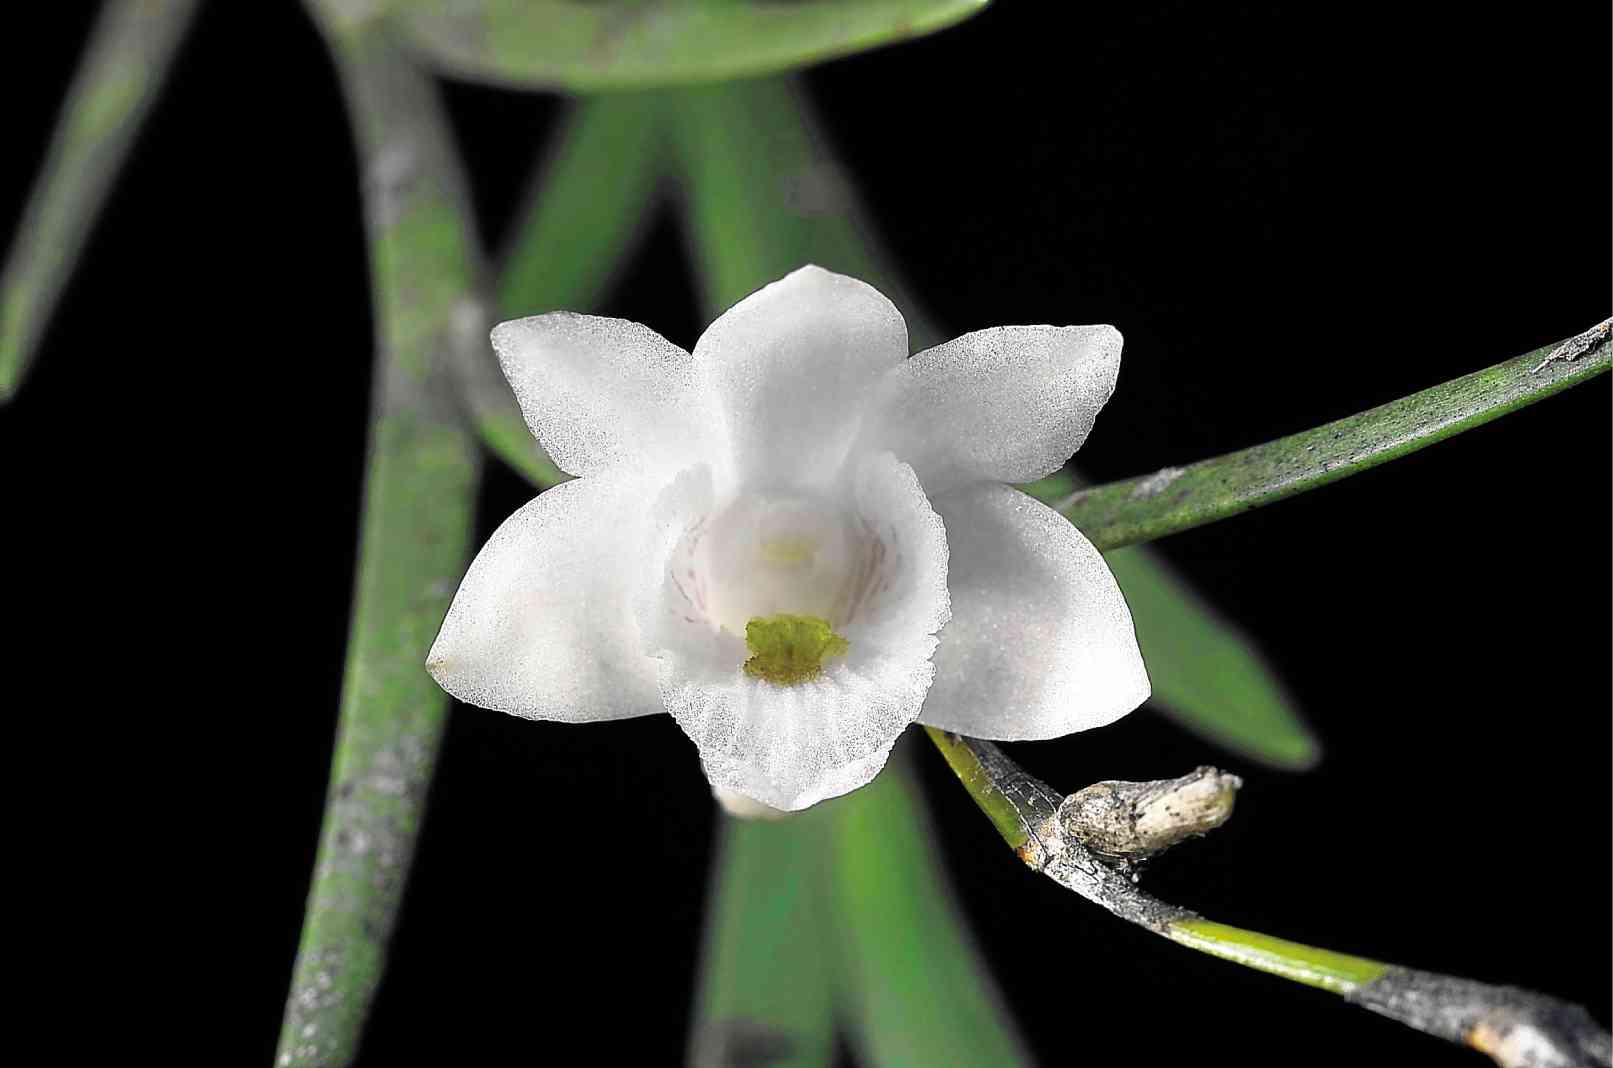 RARE BREED  This new orchid named “Dendrobium lydiae” was taken in Bukidnon. Five new orchid species have been discovered in increasingly denuded Philippine mountains, highlighting the need to protect forests in one of the world’s most biologically diverse countries, conservatives said on Friday. AFP